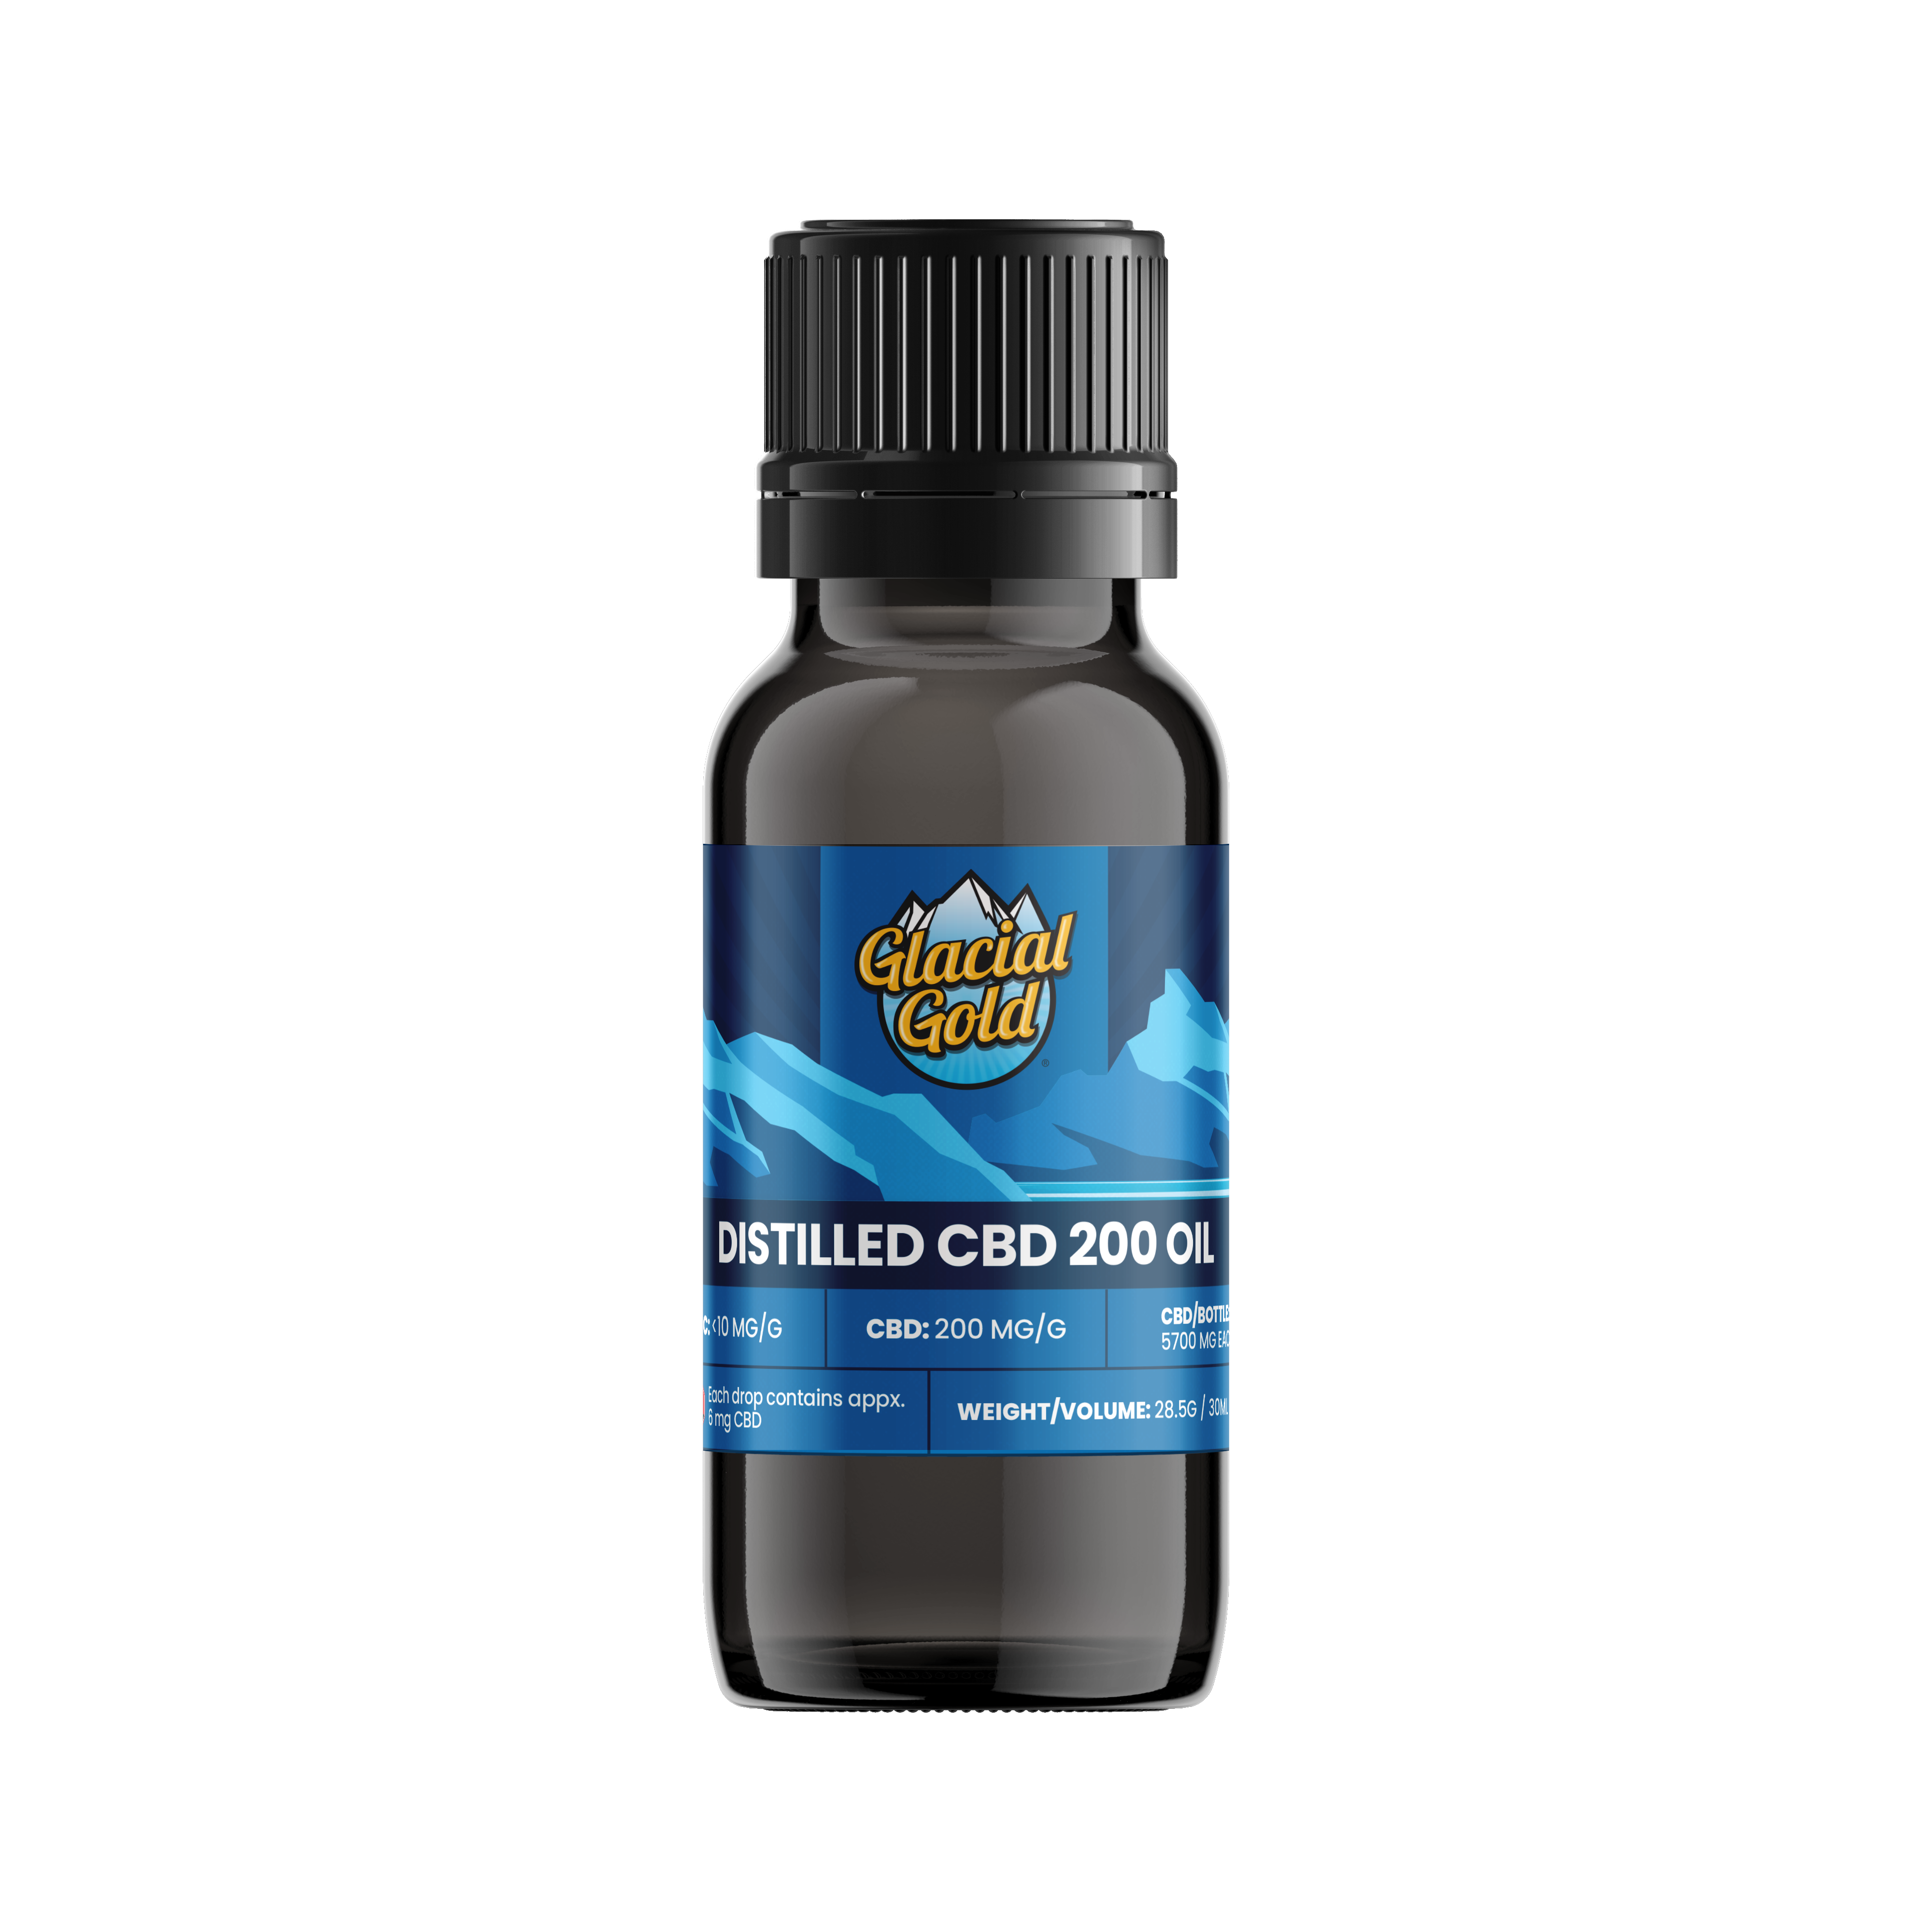 Cannabis Product Distilled CBD 200 Oil by Glacial Gold